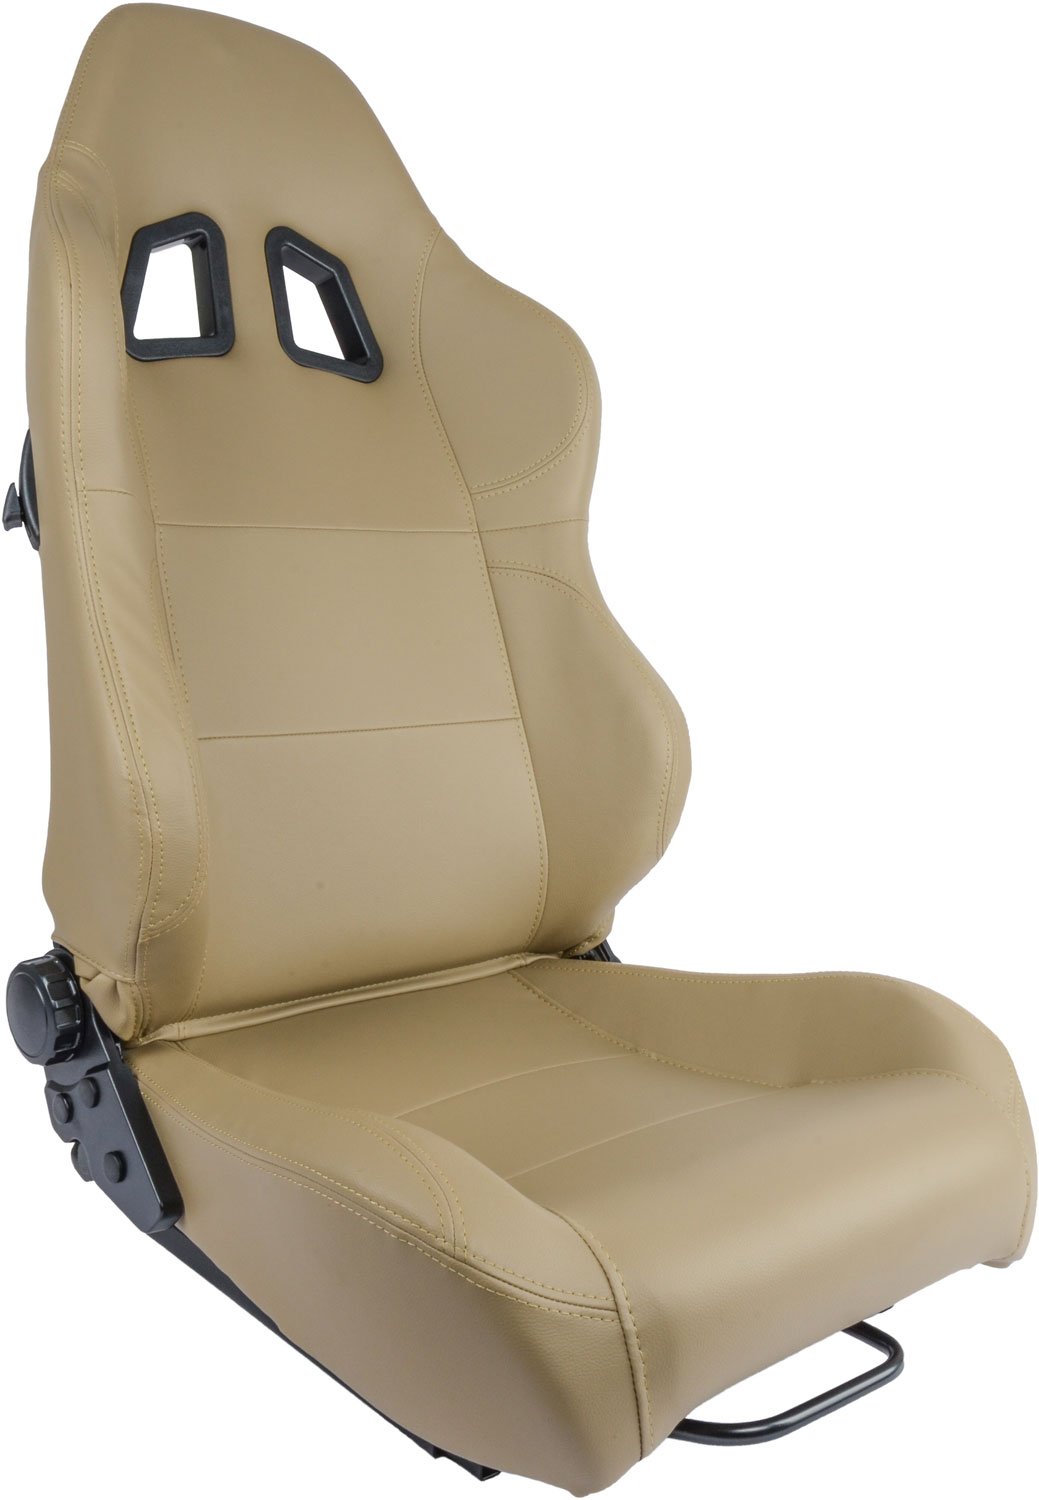 GS-1 High Back Sport Seat Driver or Passenger